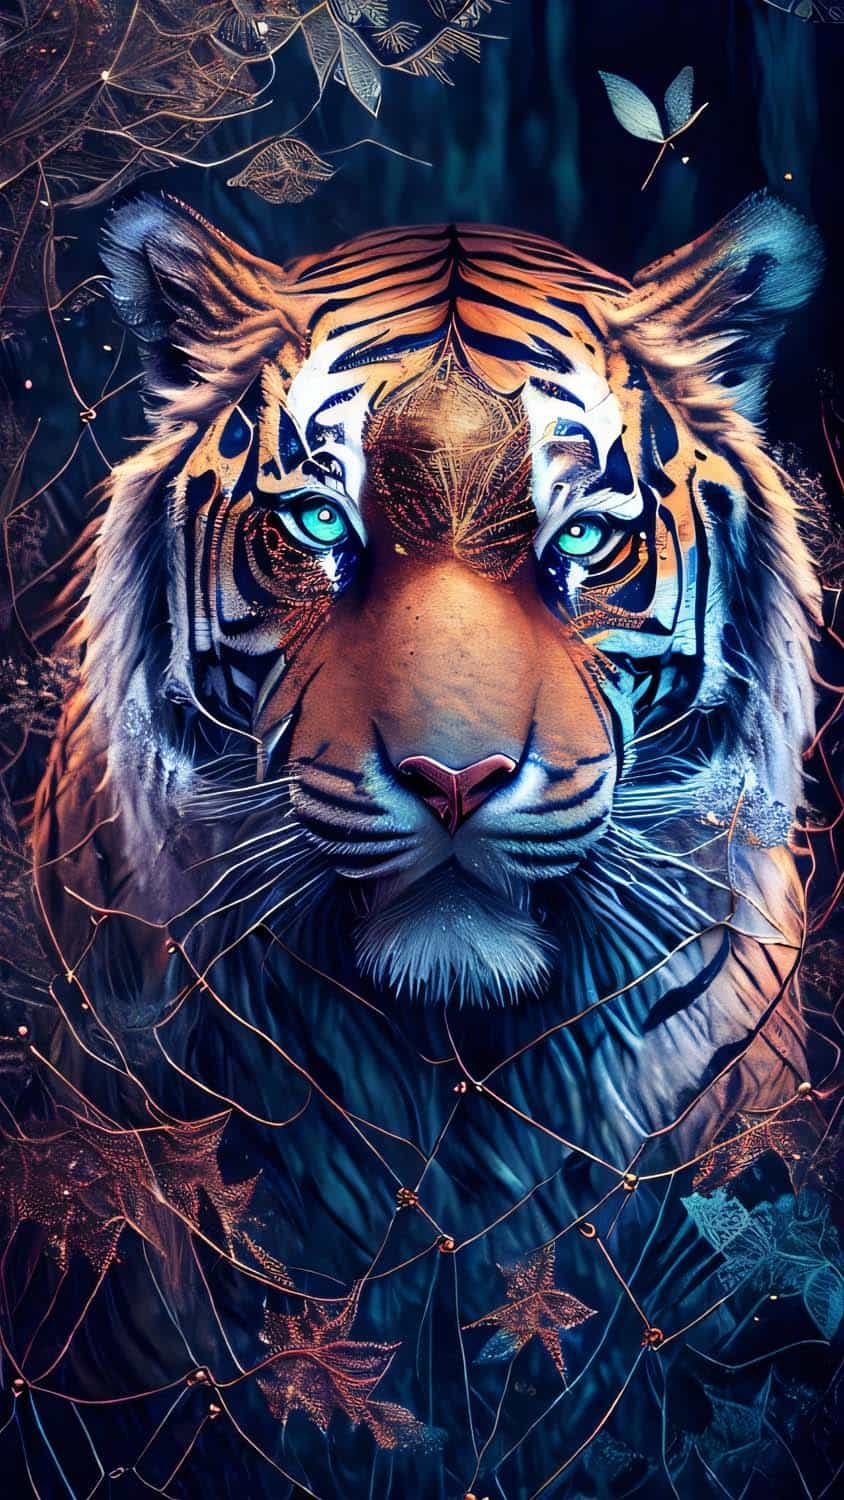 Tiger Pictures  Download Free Images  Stock Photos on Unsplash